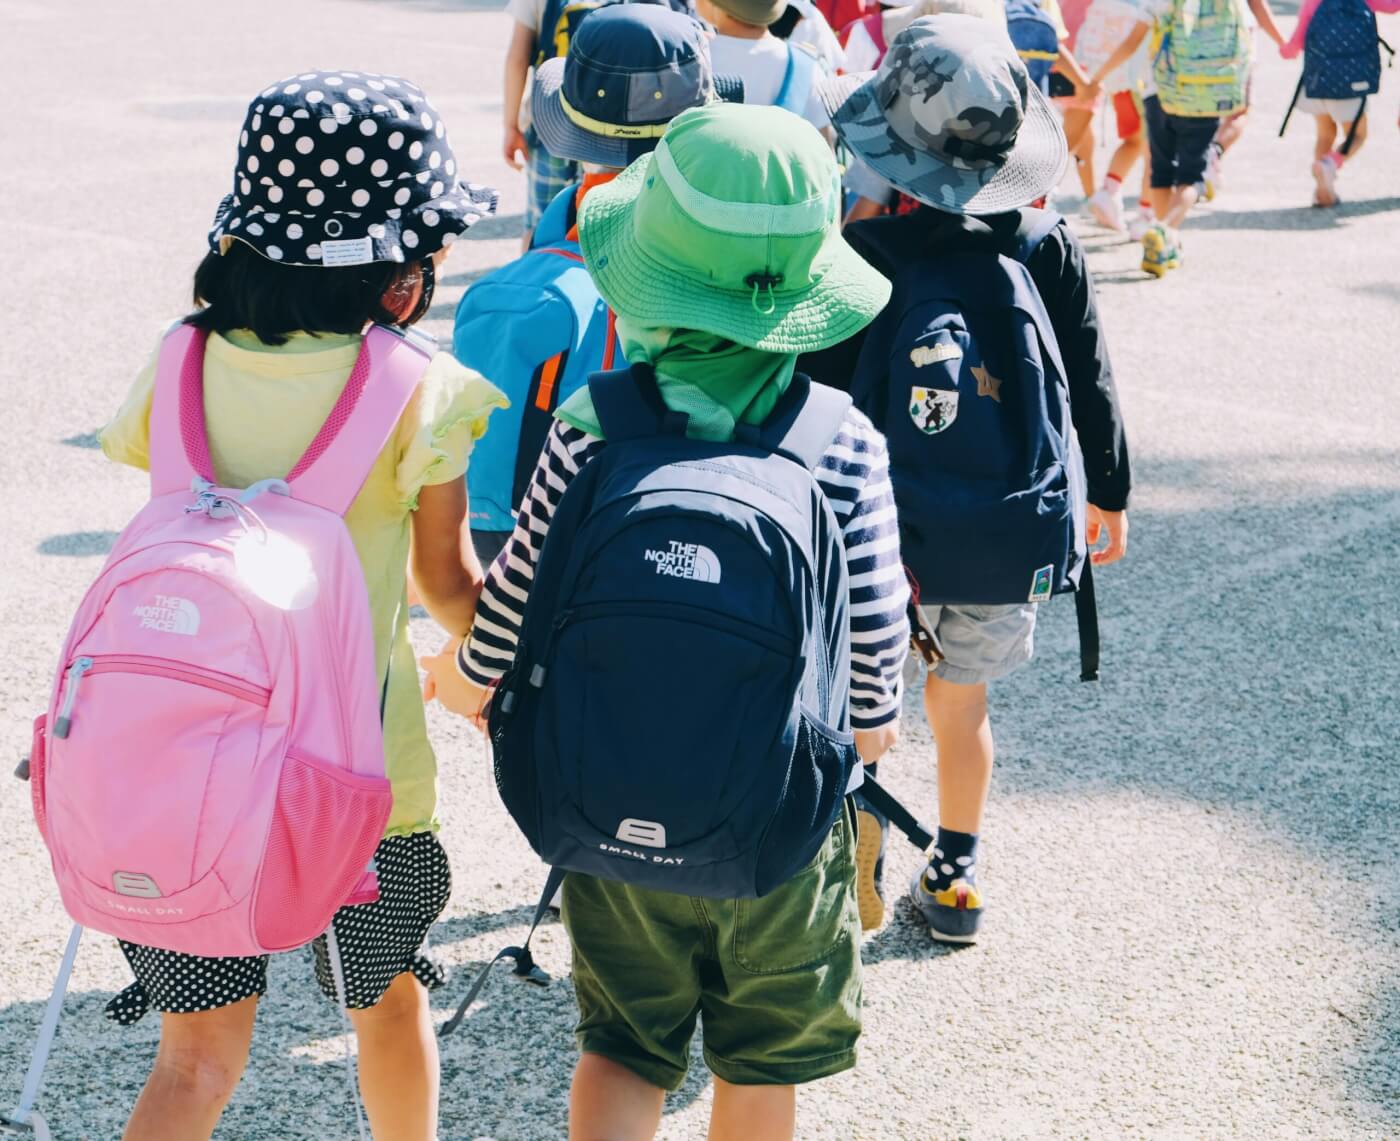 kids in a line at school with their school bags on and hats